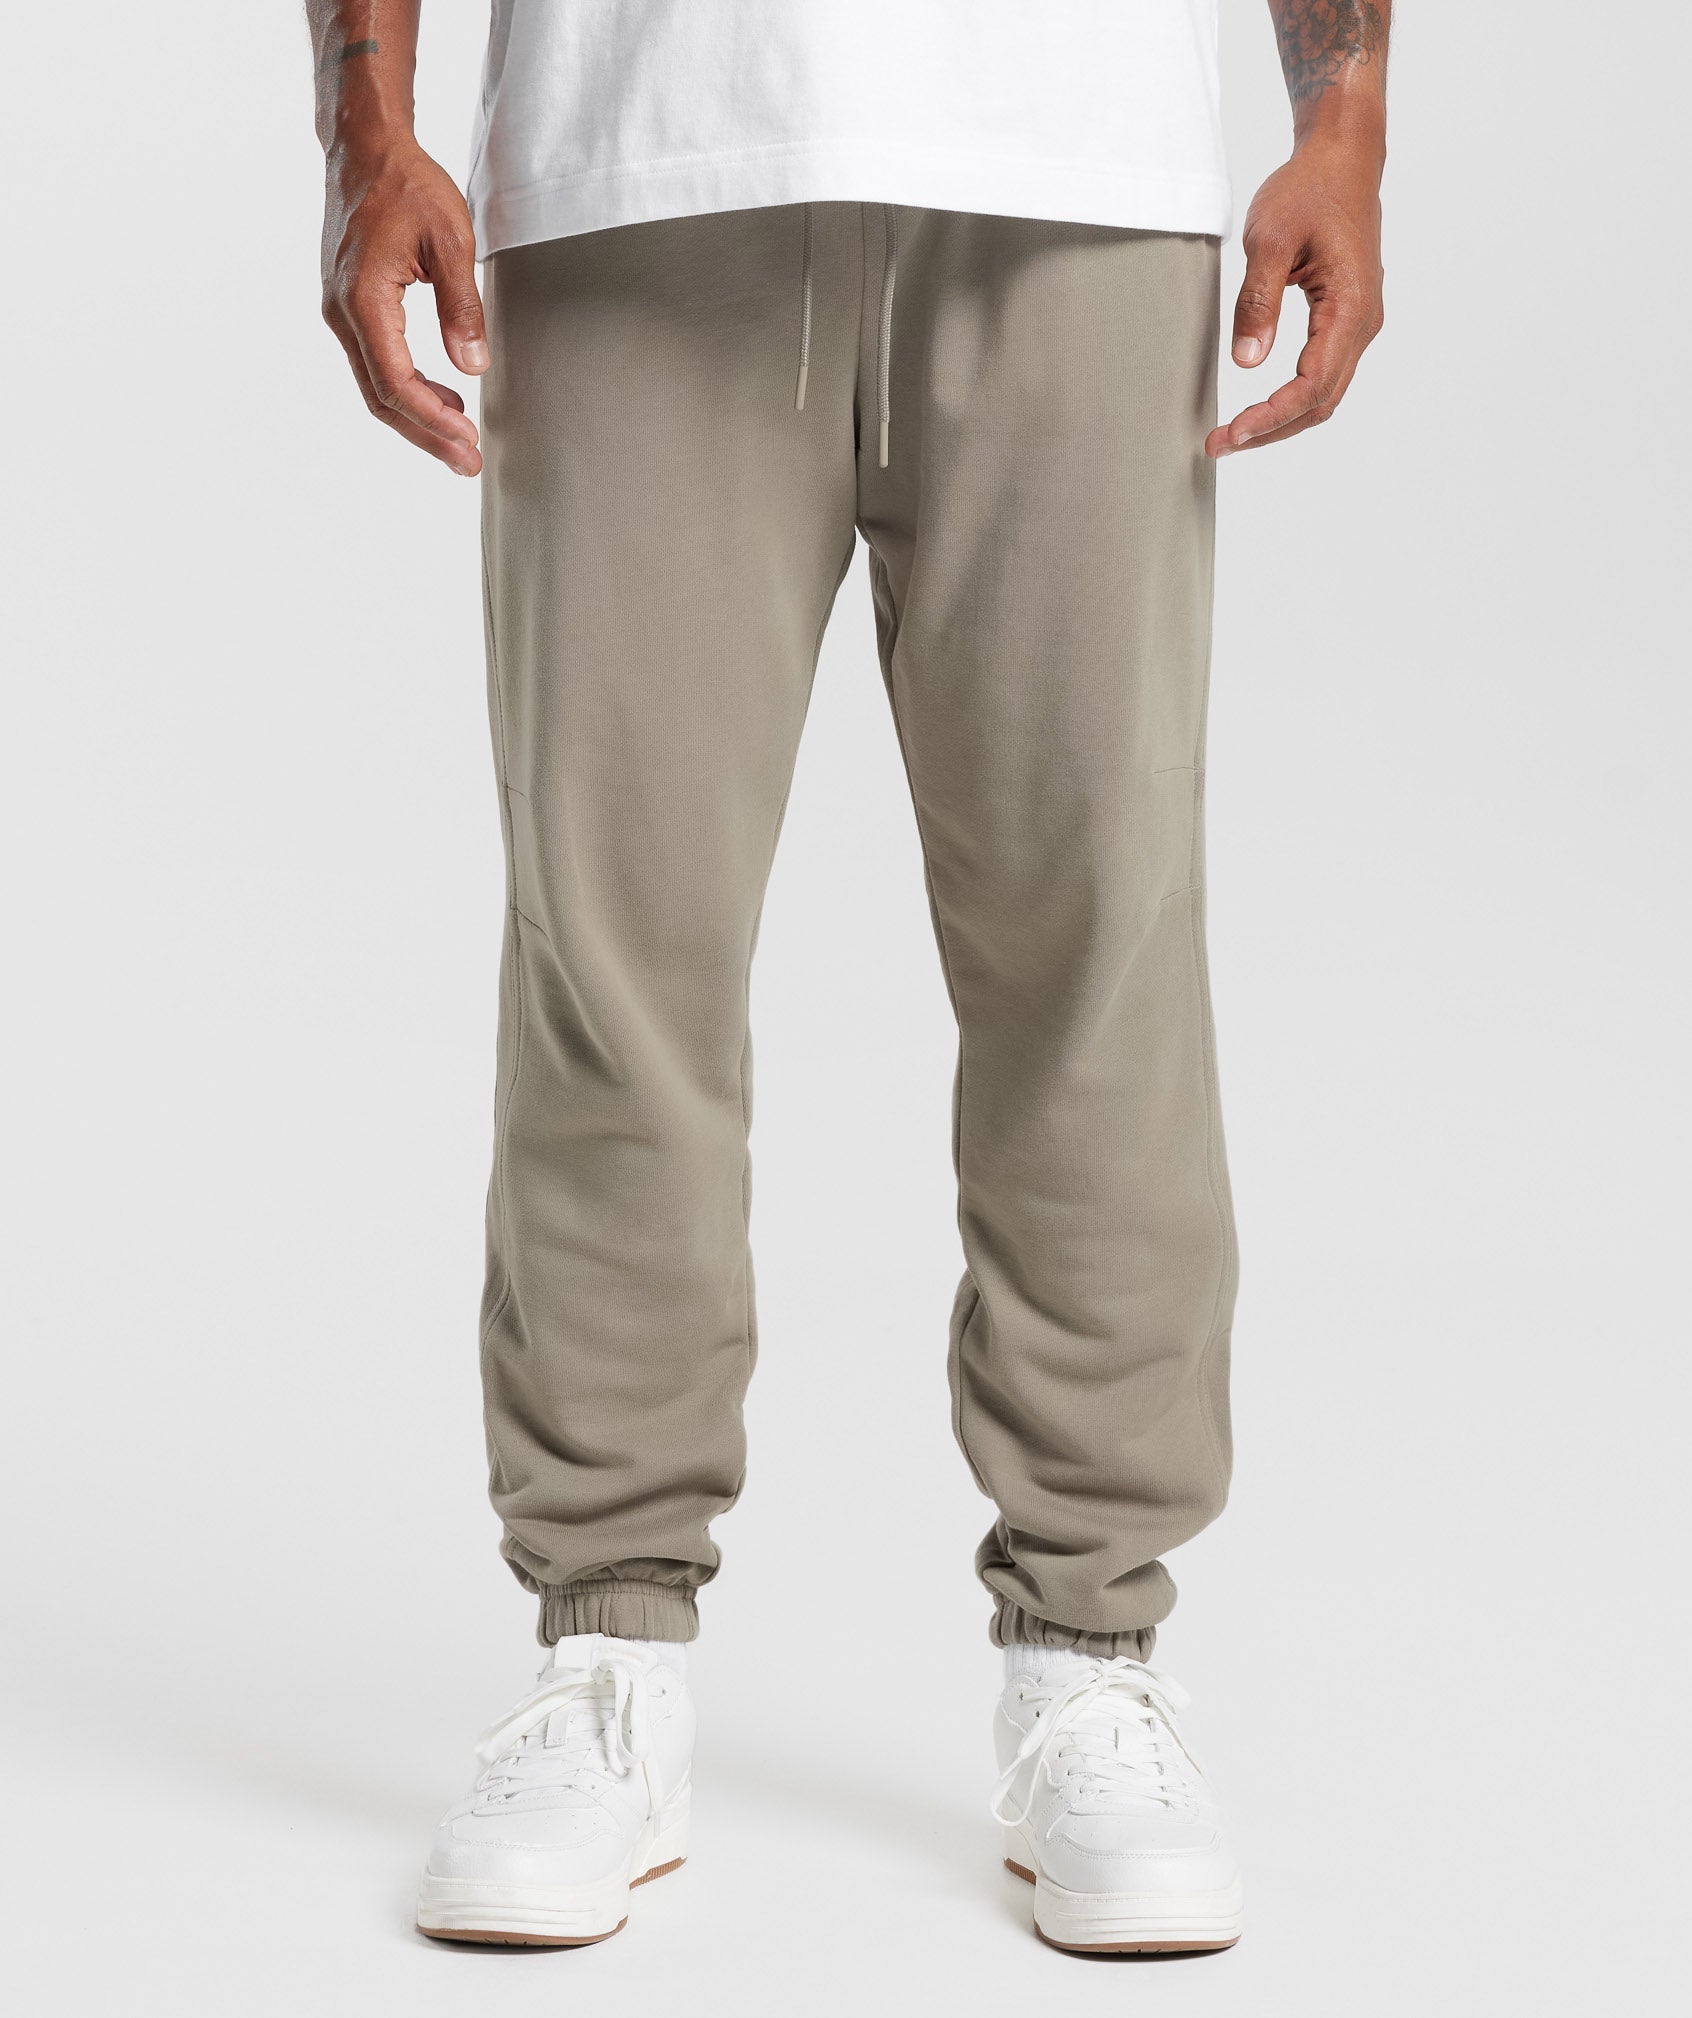 Rest Day Woven Oversized Joggers